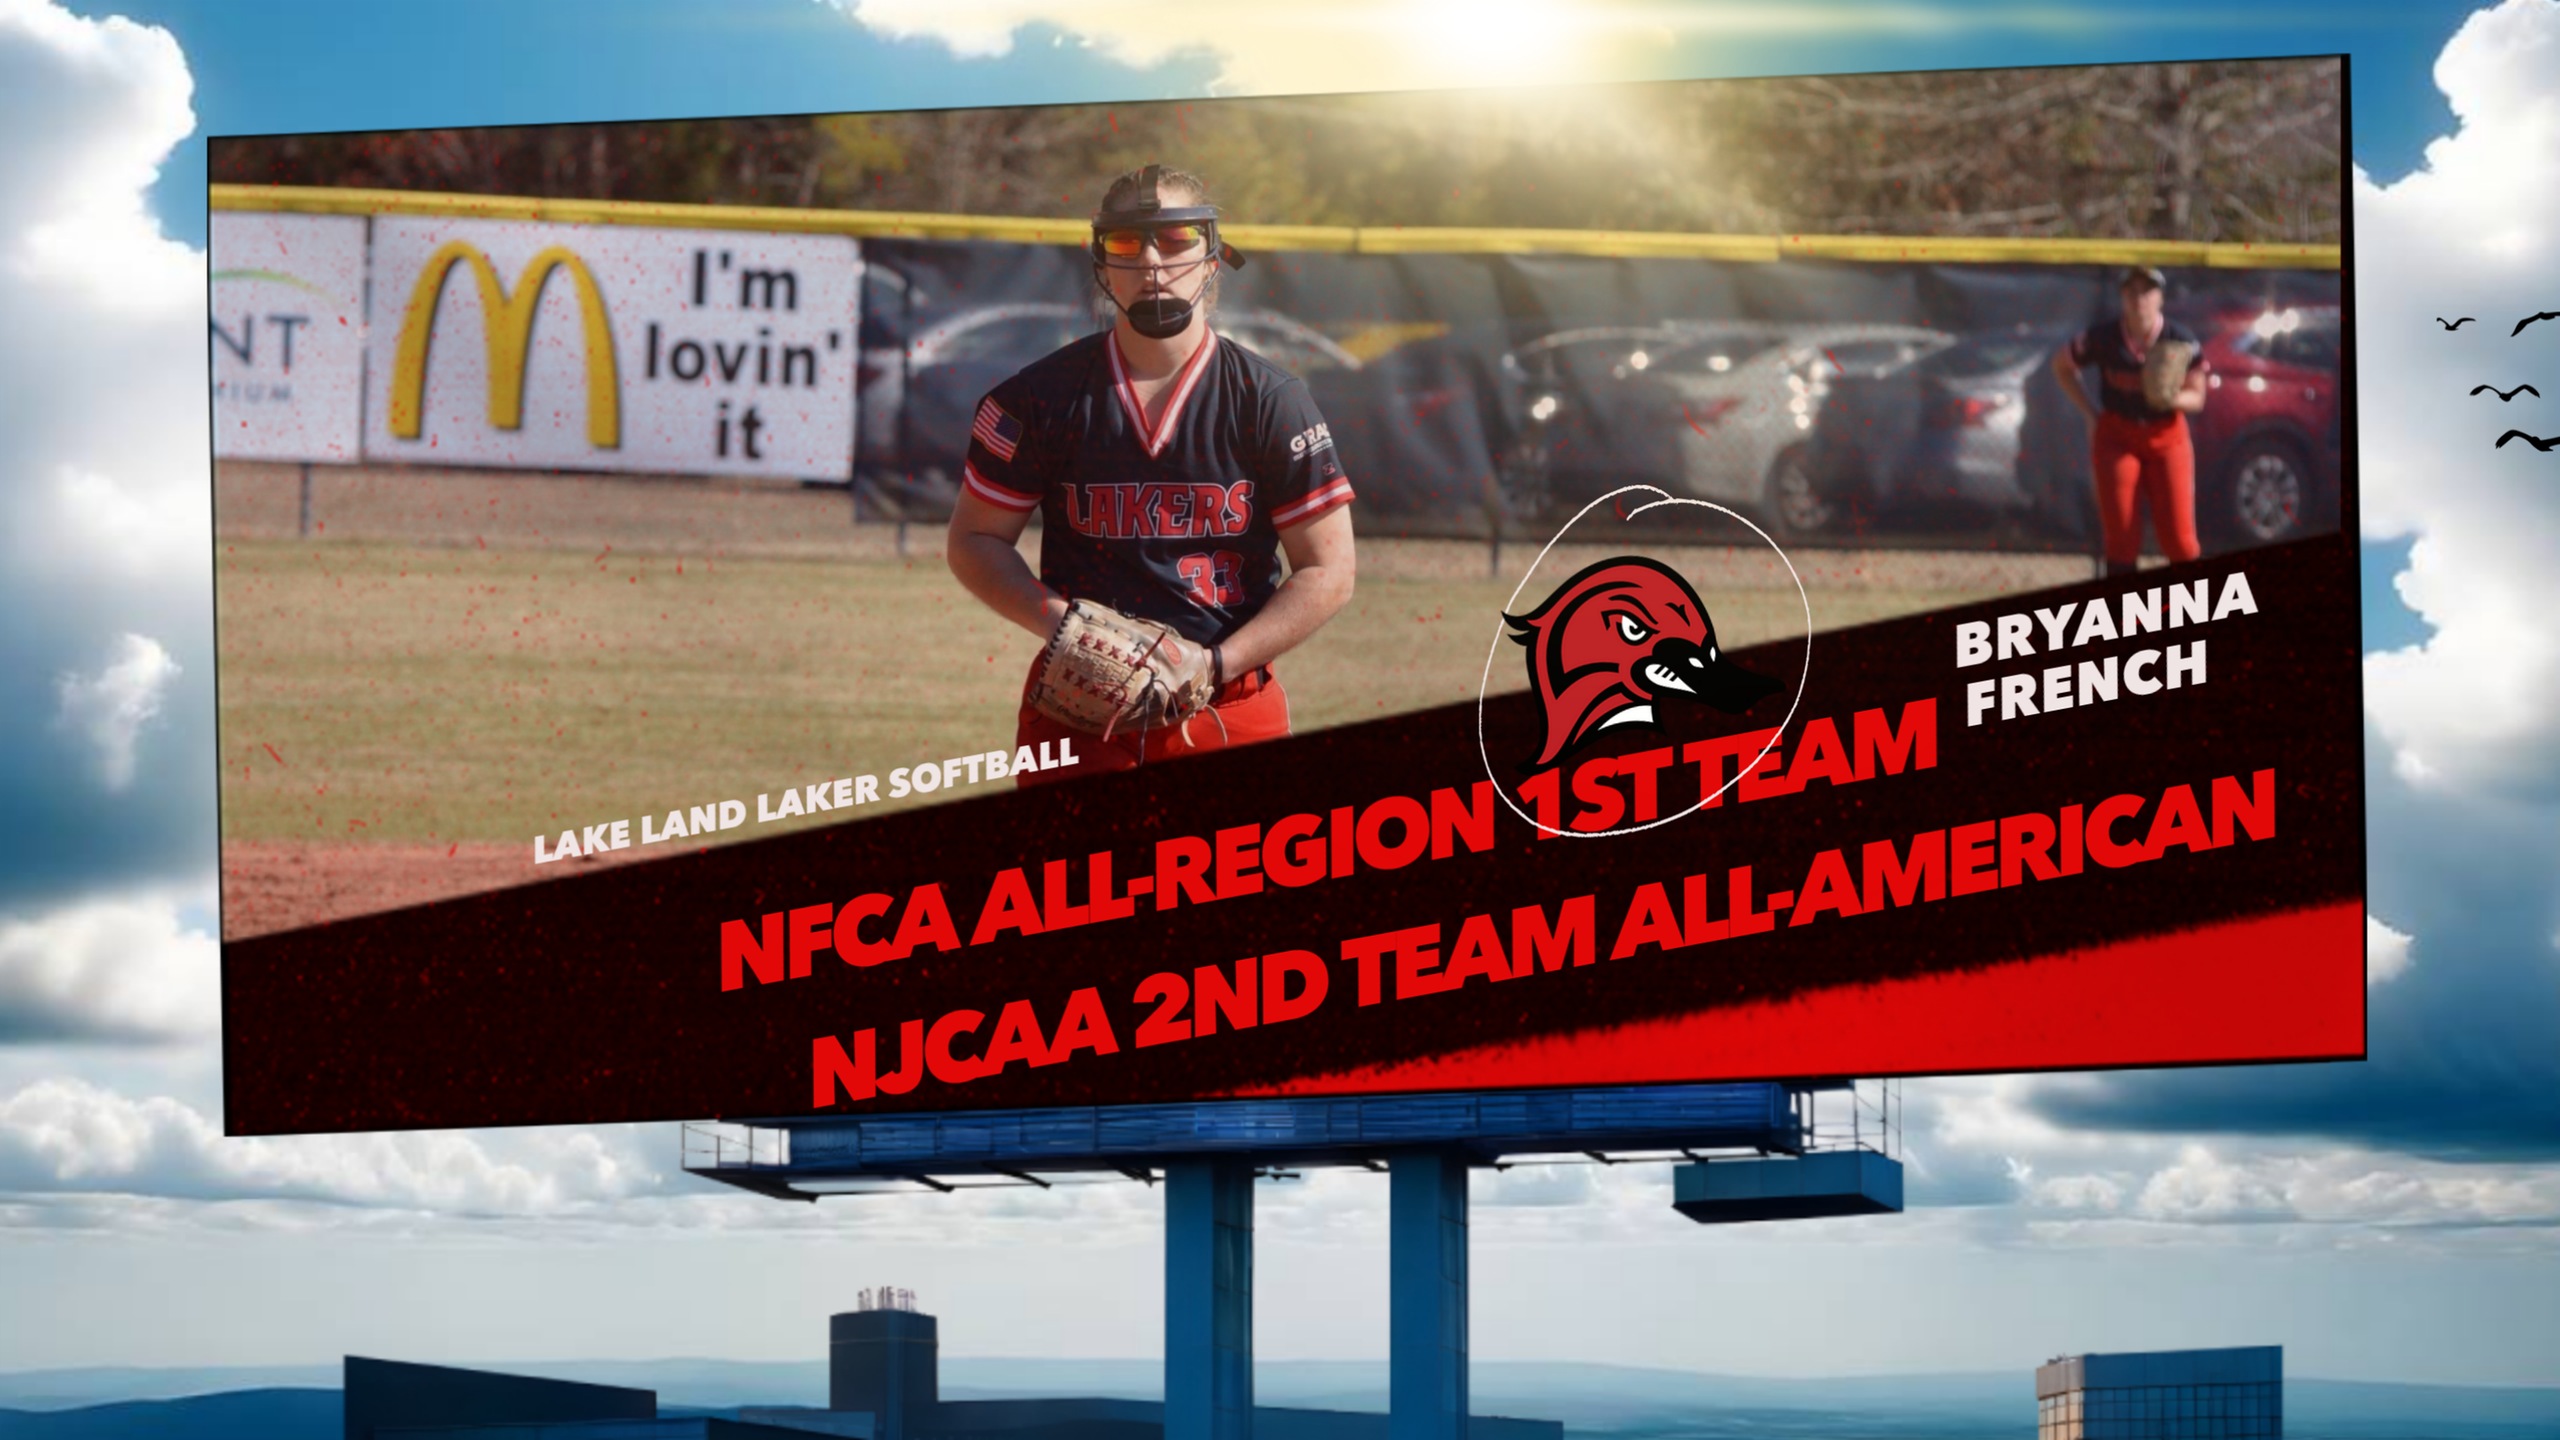 SO Pitcher French Named 2nd Team All-American